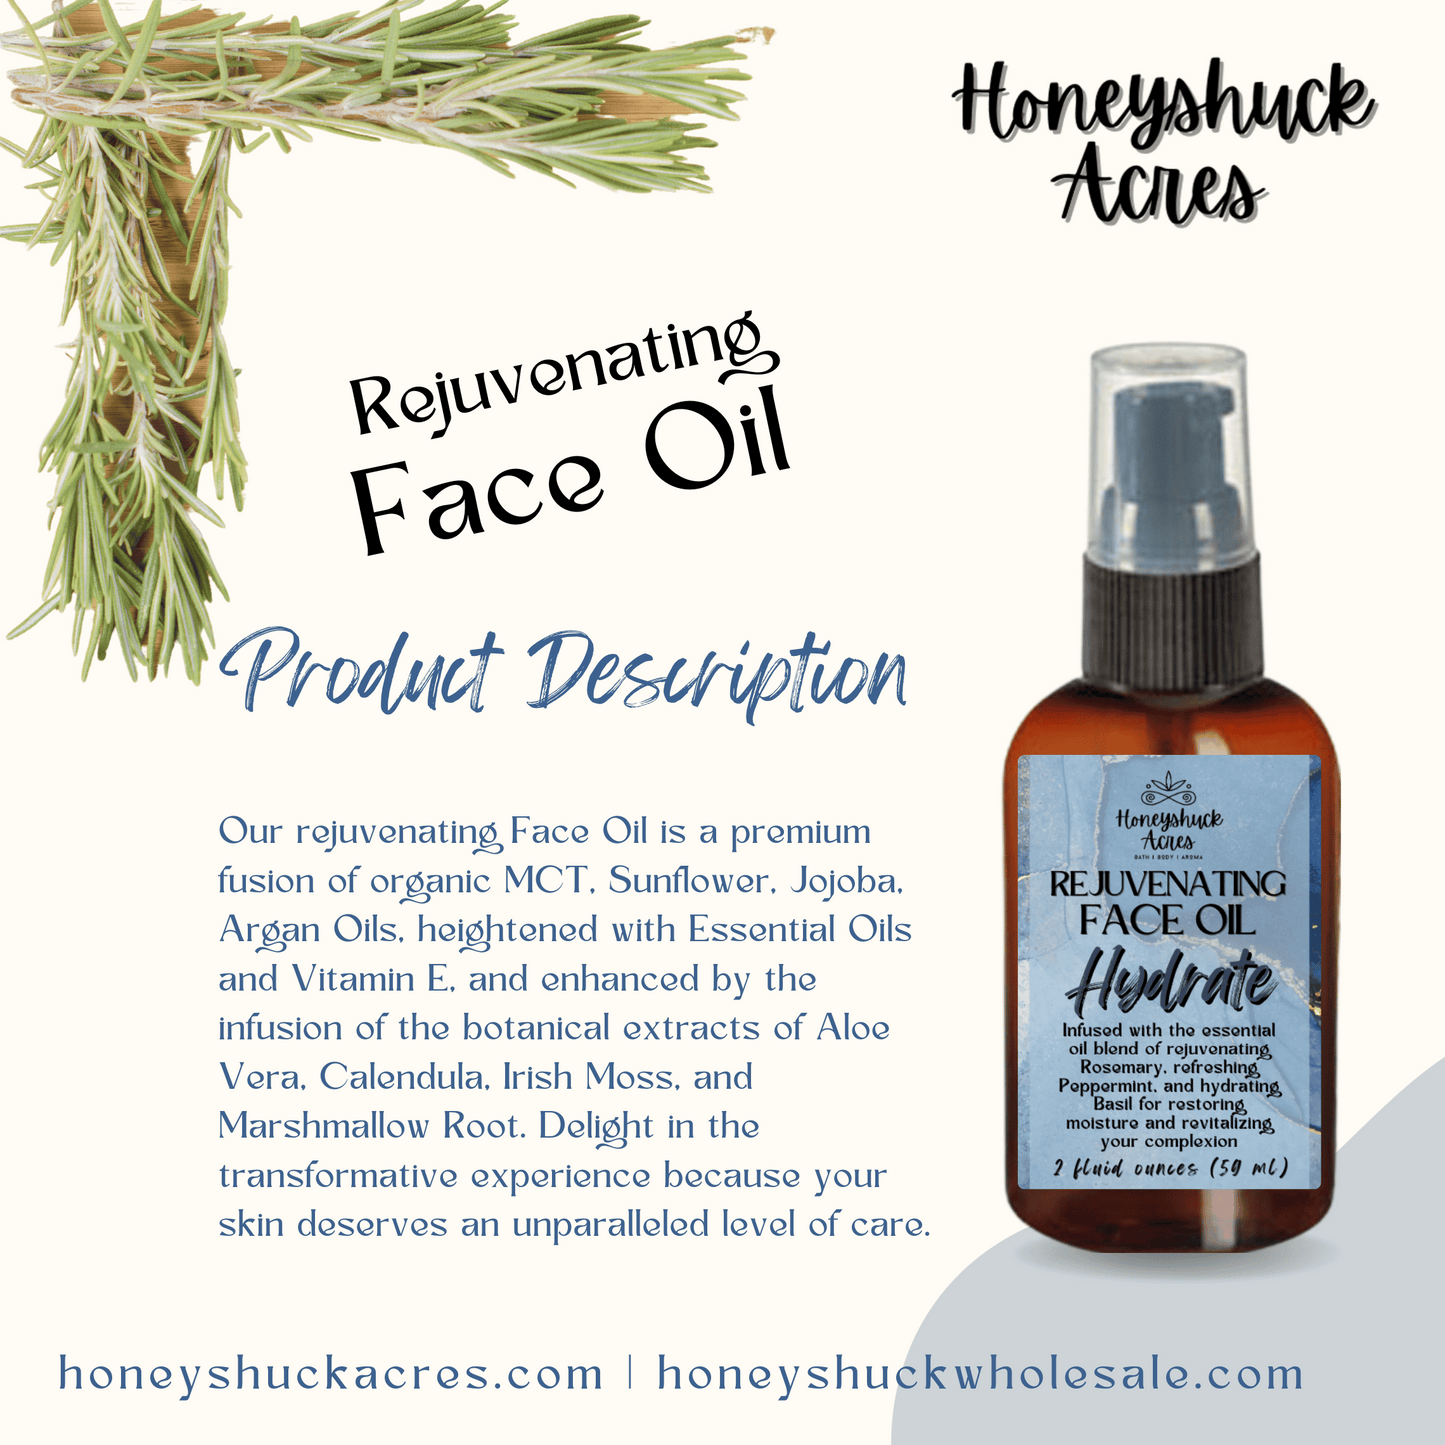 Face Oil | Hydrate | Essential Oils + Botanical Extracts | 2 fluid ounces